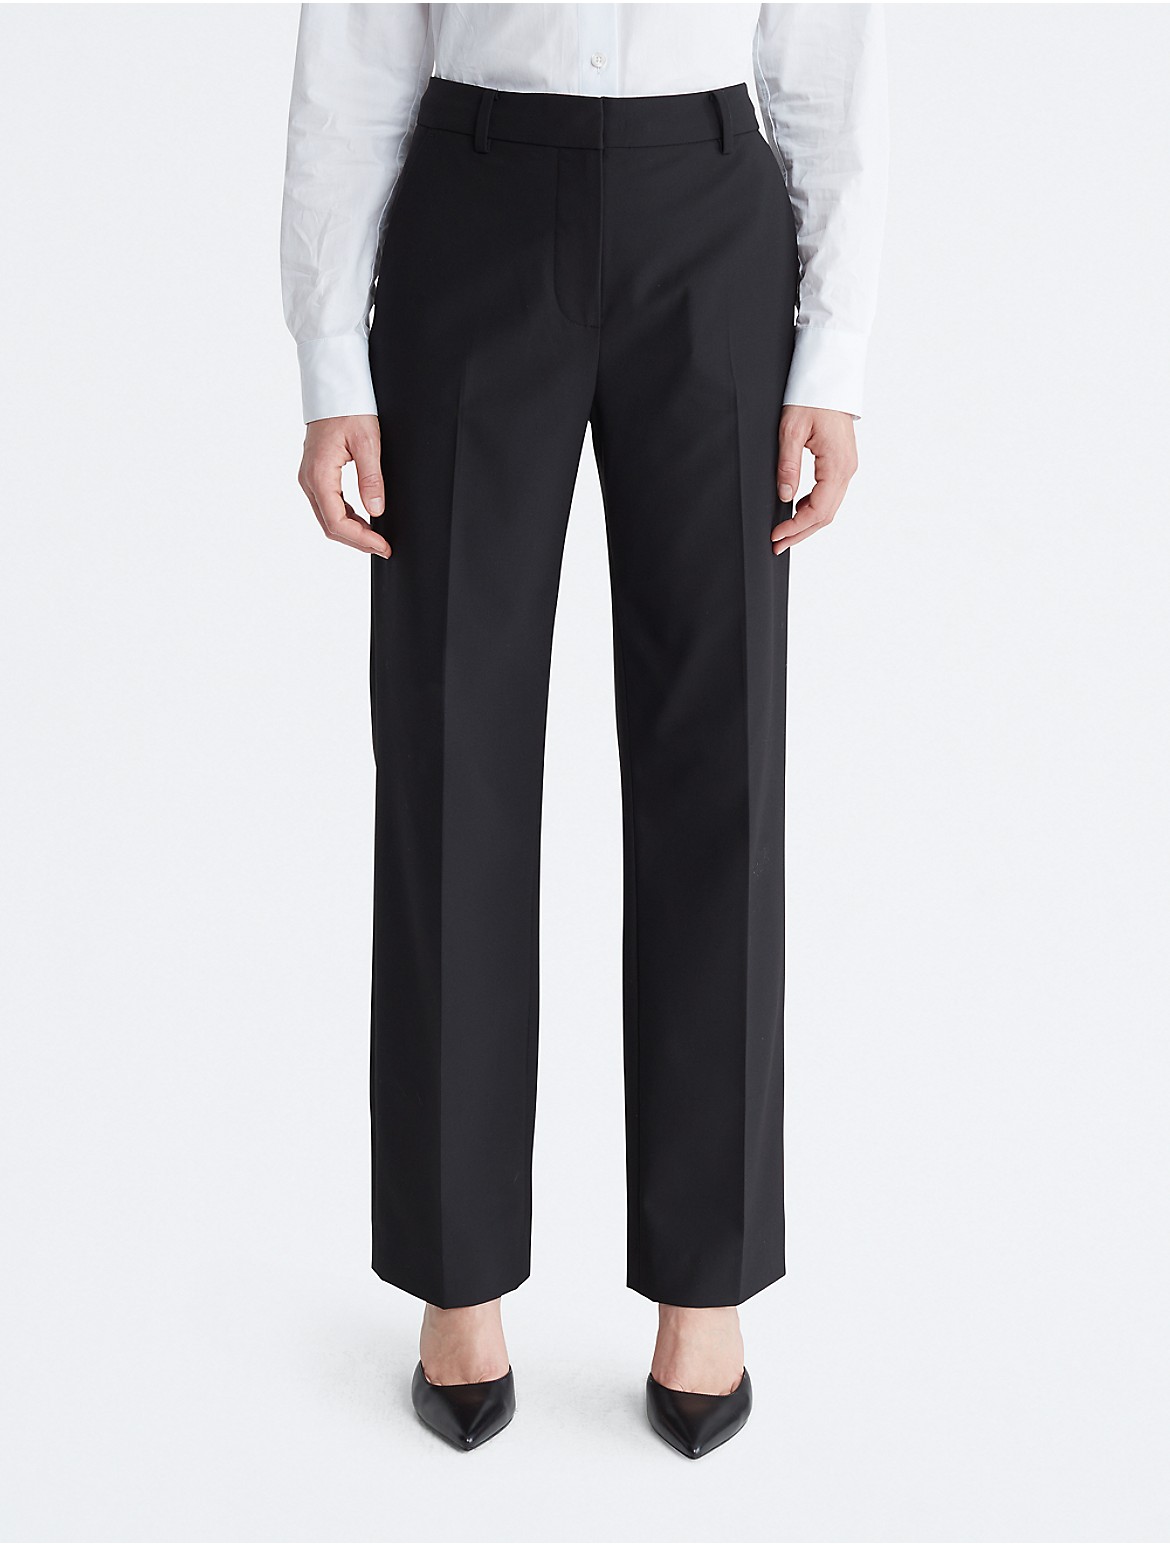 Calvin Klein Women's Refined Stretch Tailored Trousers - Black - 27